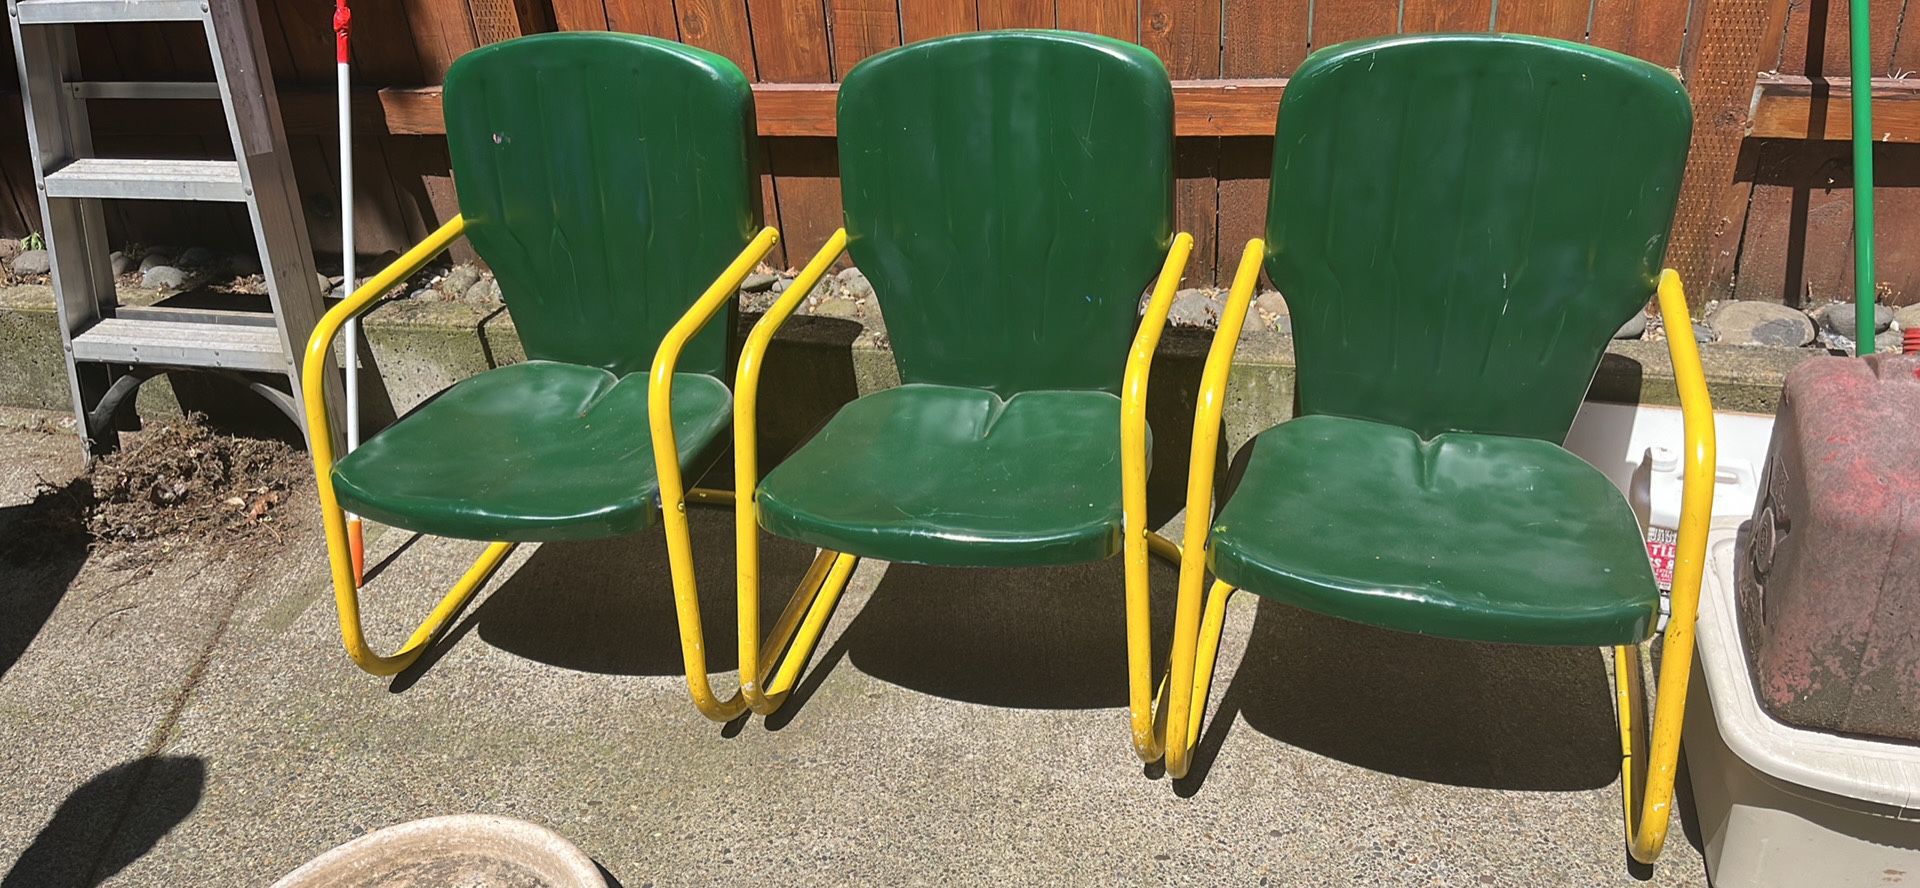  Metal Chairs -$20 For All 3